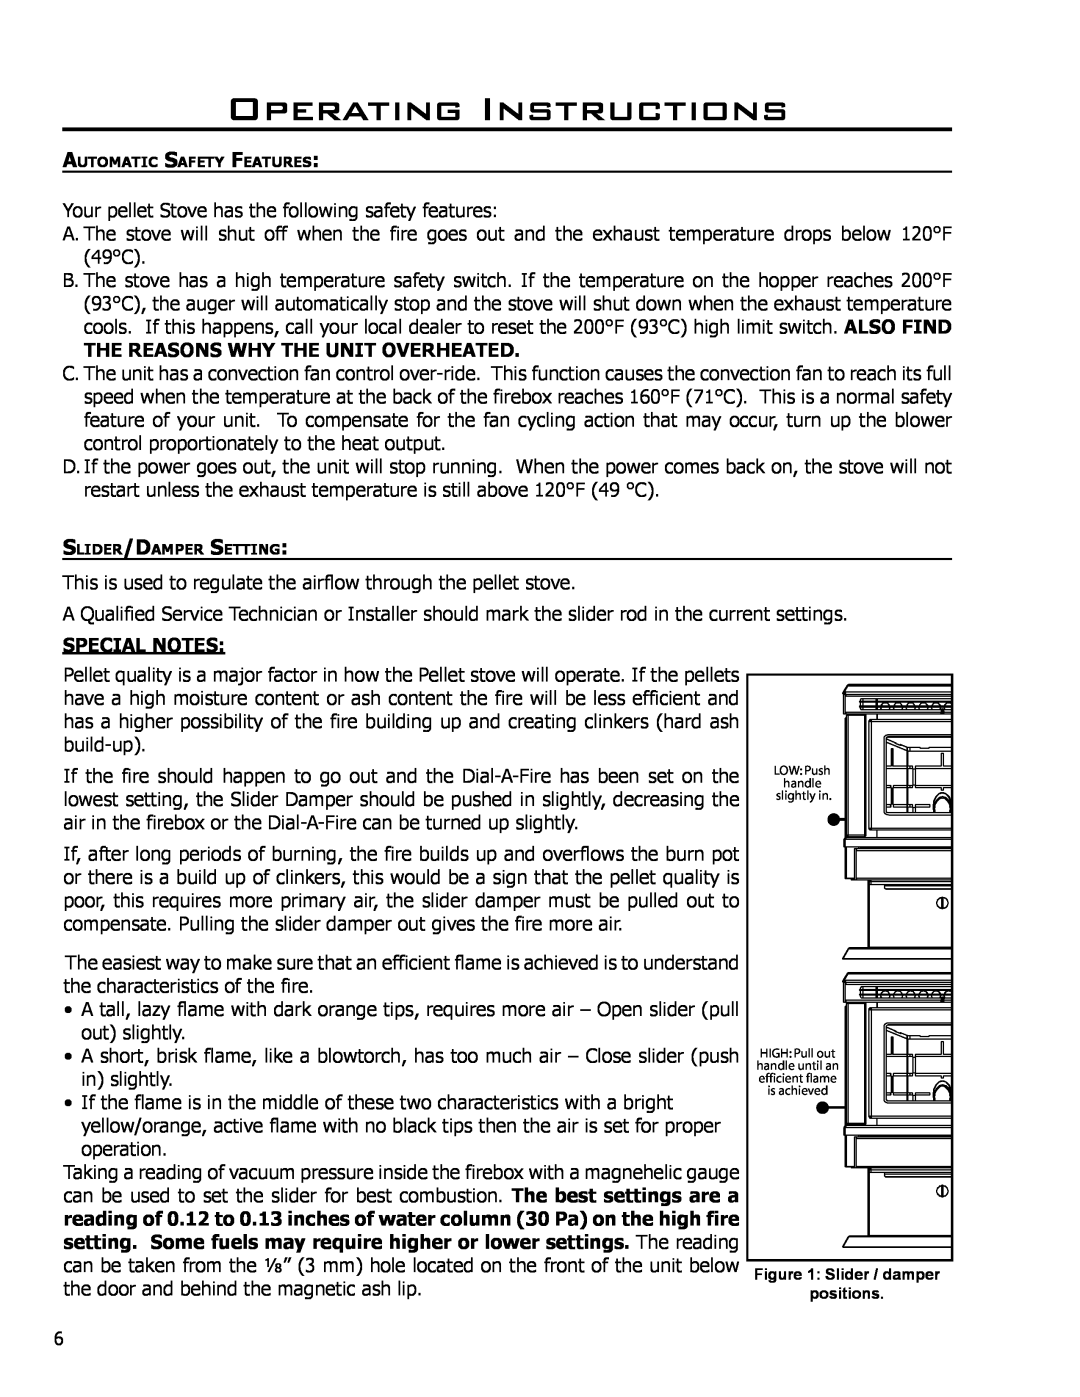 Enviro EF-119 owner manual Operating Instructions, The Reasons Why The Unit Overheated, Special Notes 